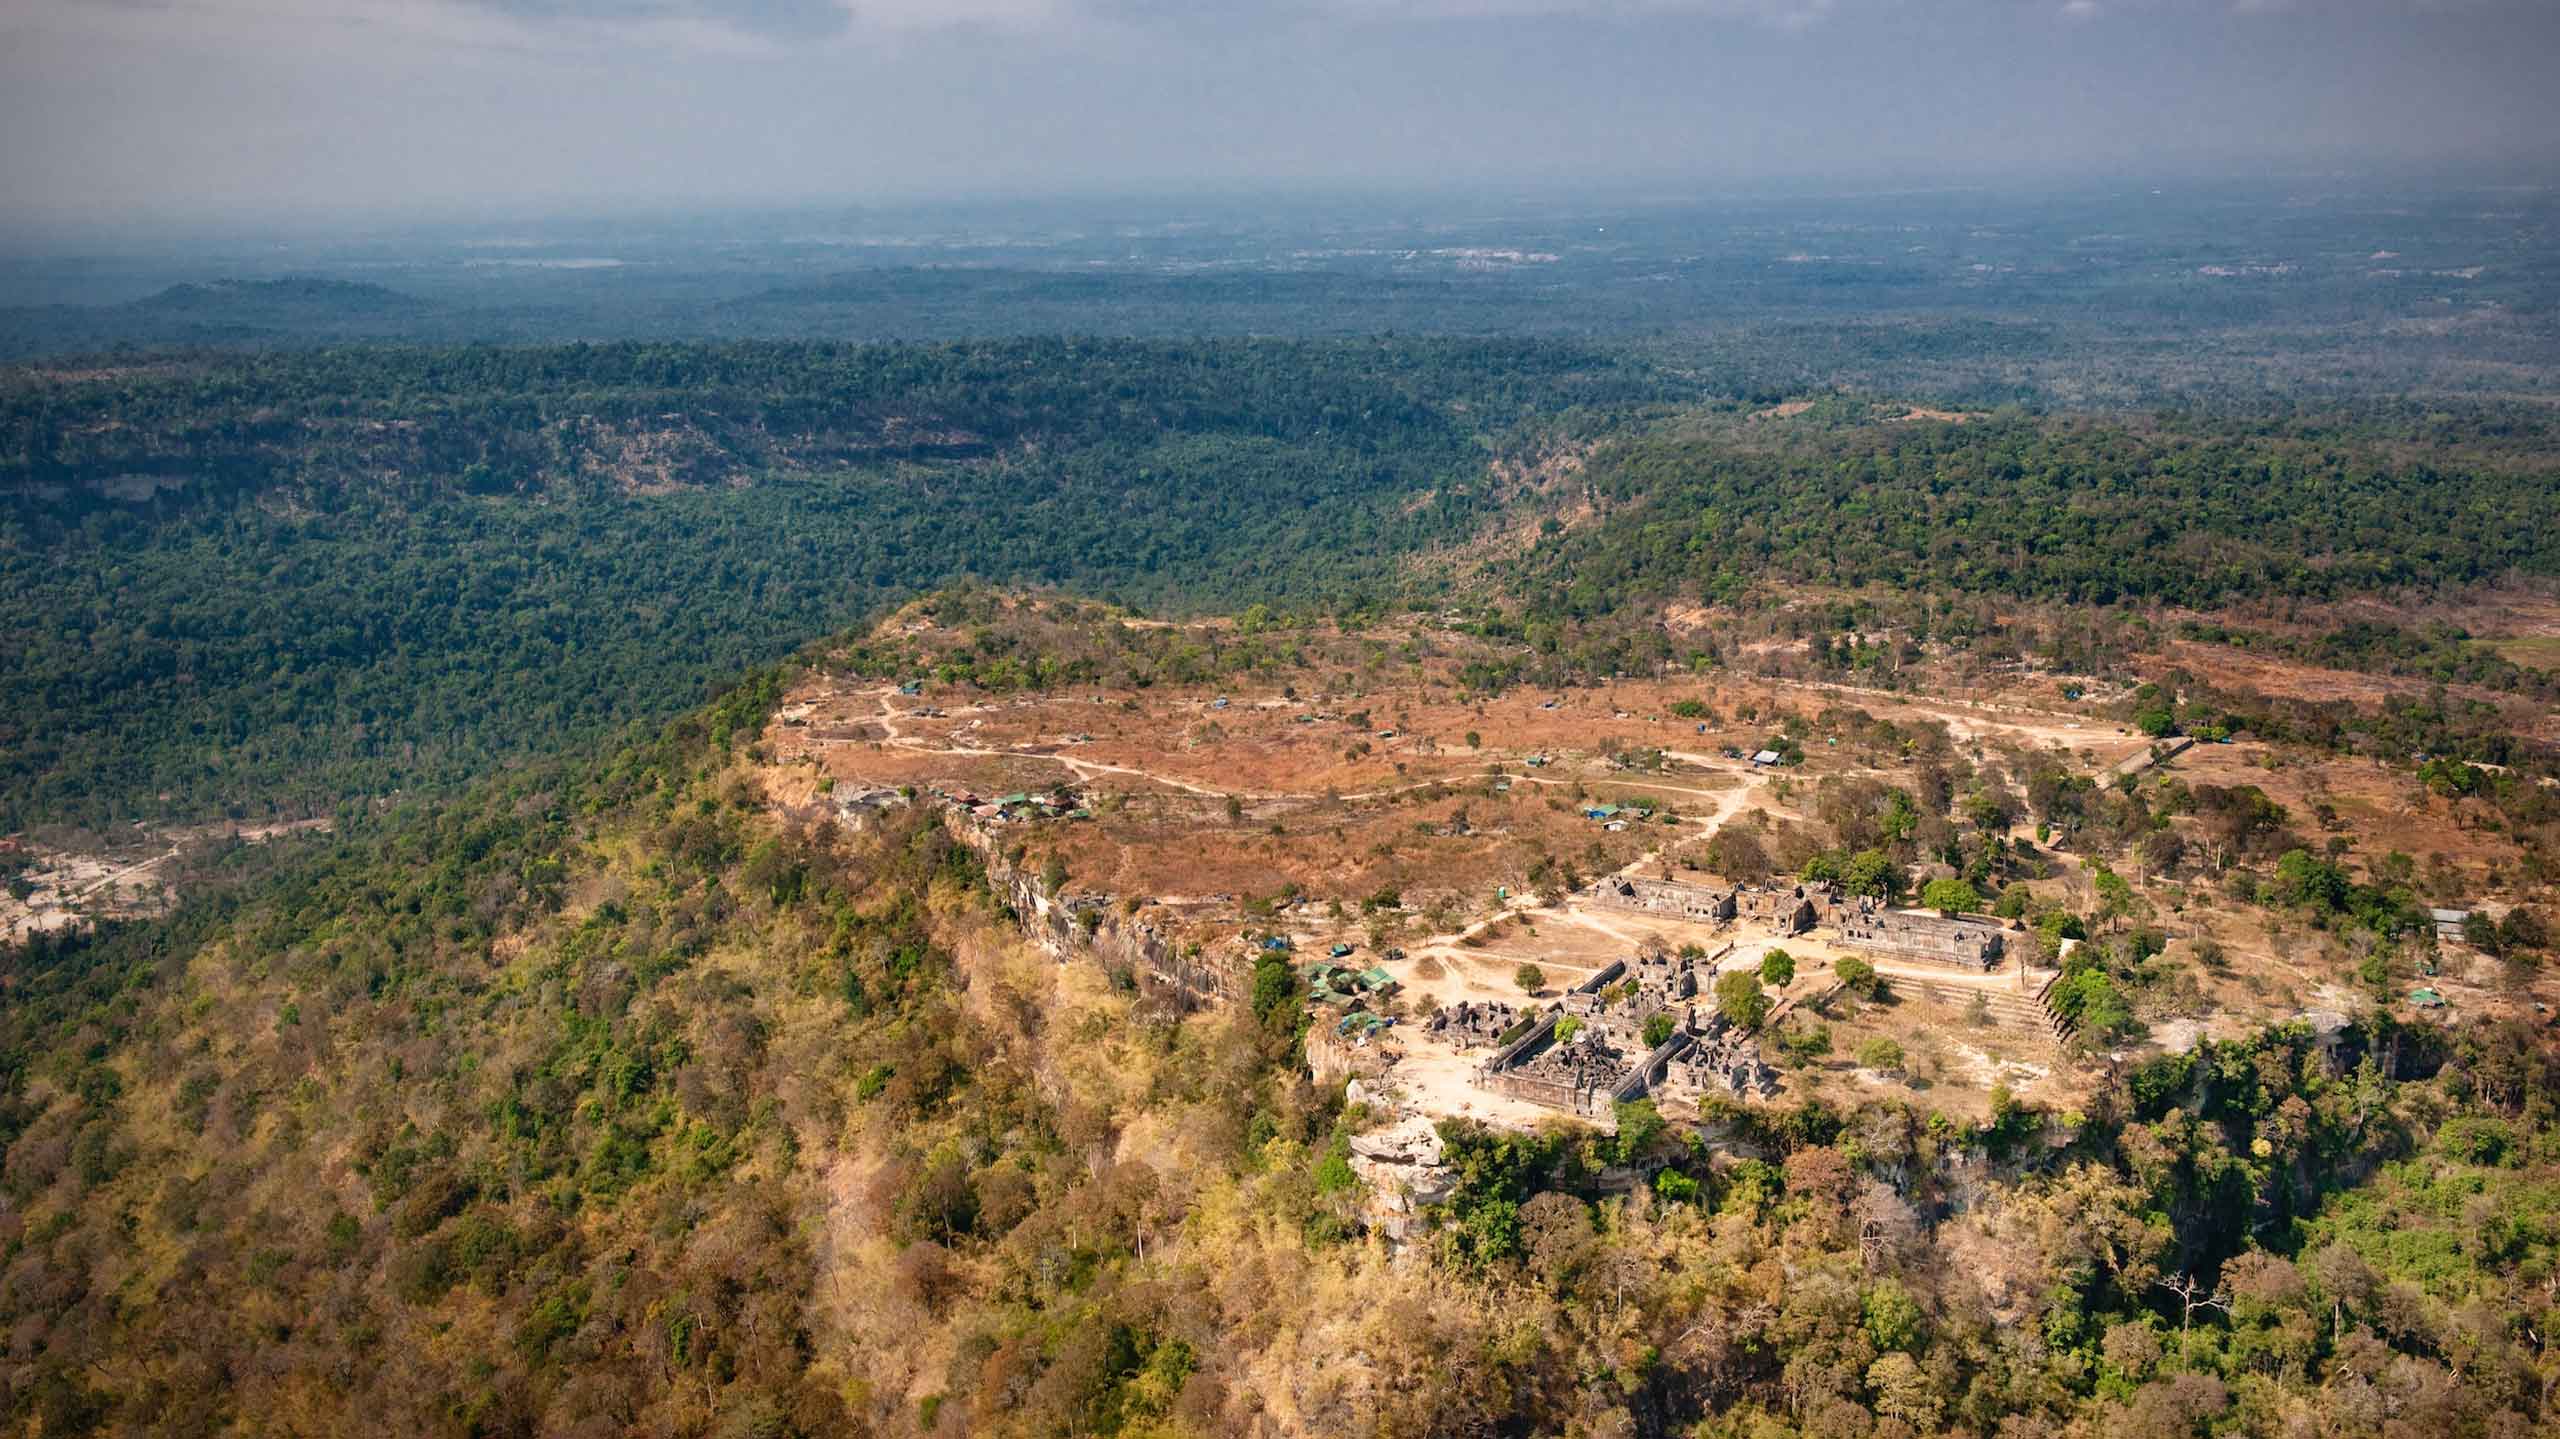 Aerial view of Preah Vihear Temple from helicopter in Cambodia